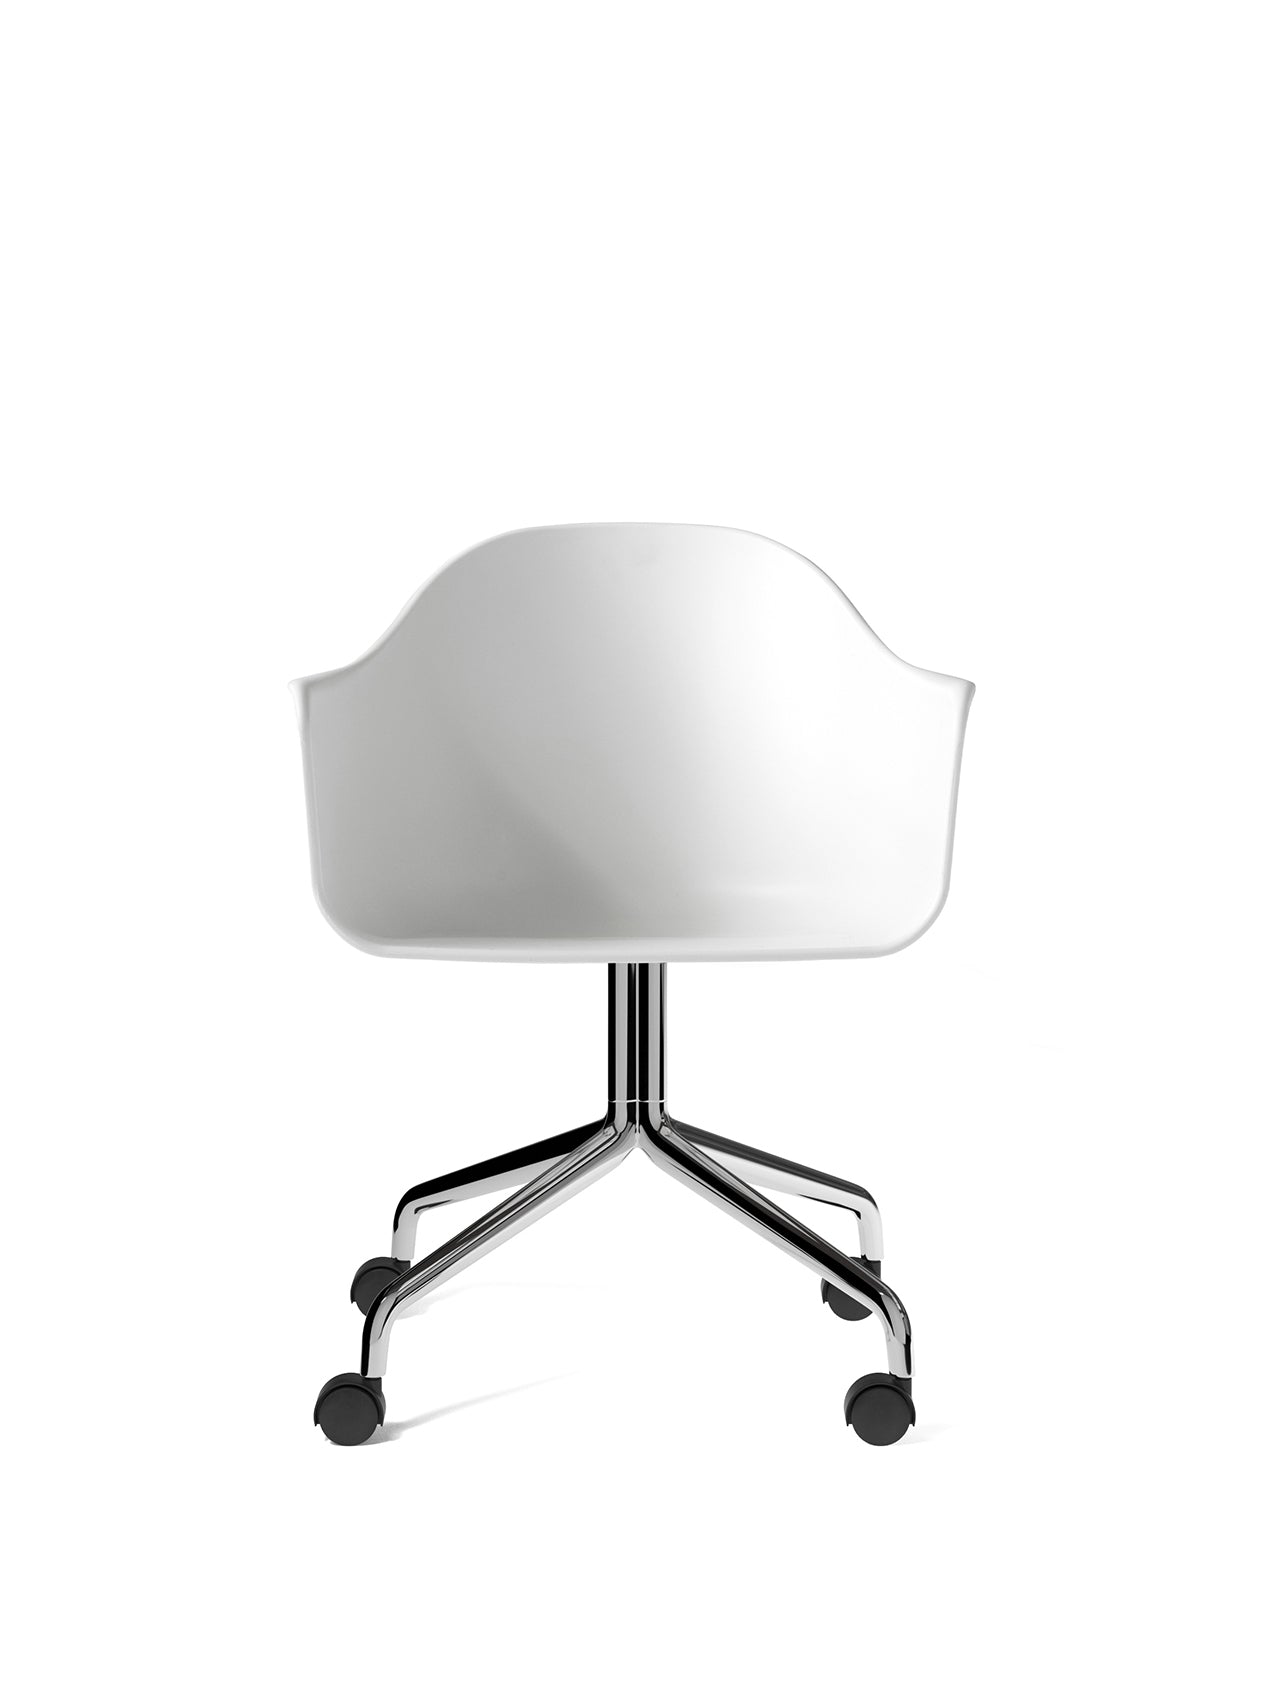 Harbour Arm Chair, Dining Height, Polished Aluminum Star Base w/Casters, Hard Shell